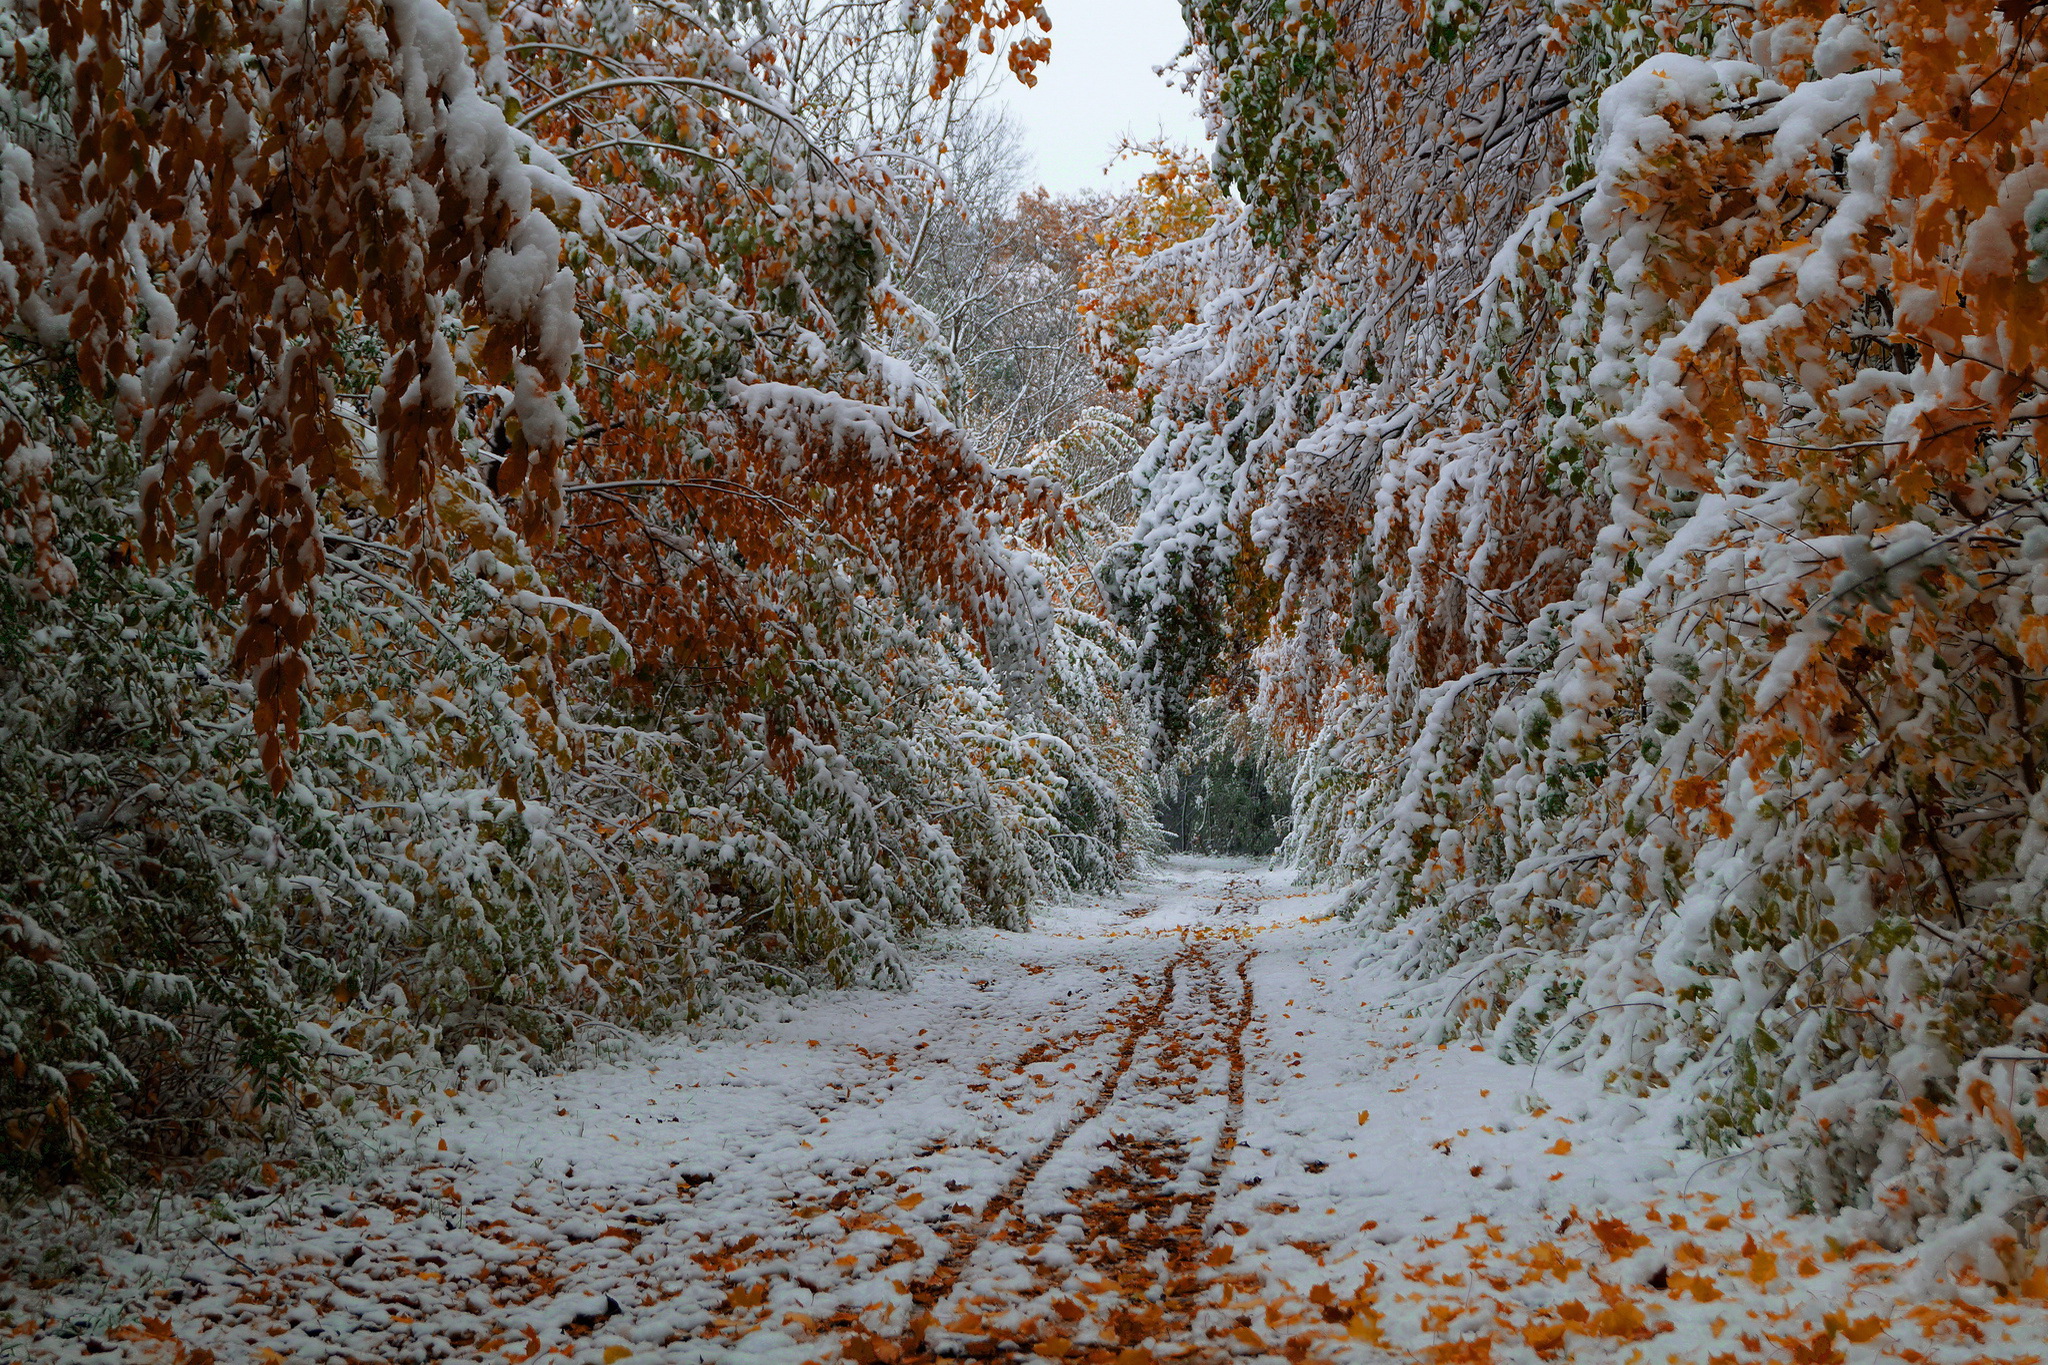 Snow before autumn end / 2048 x 1365 / Forest / Photography ...